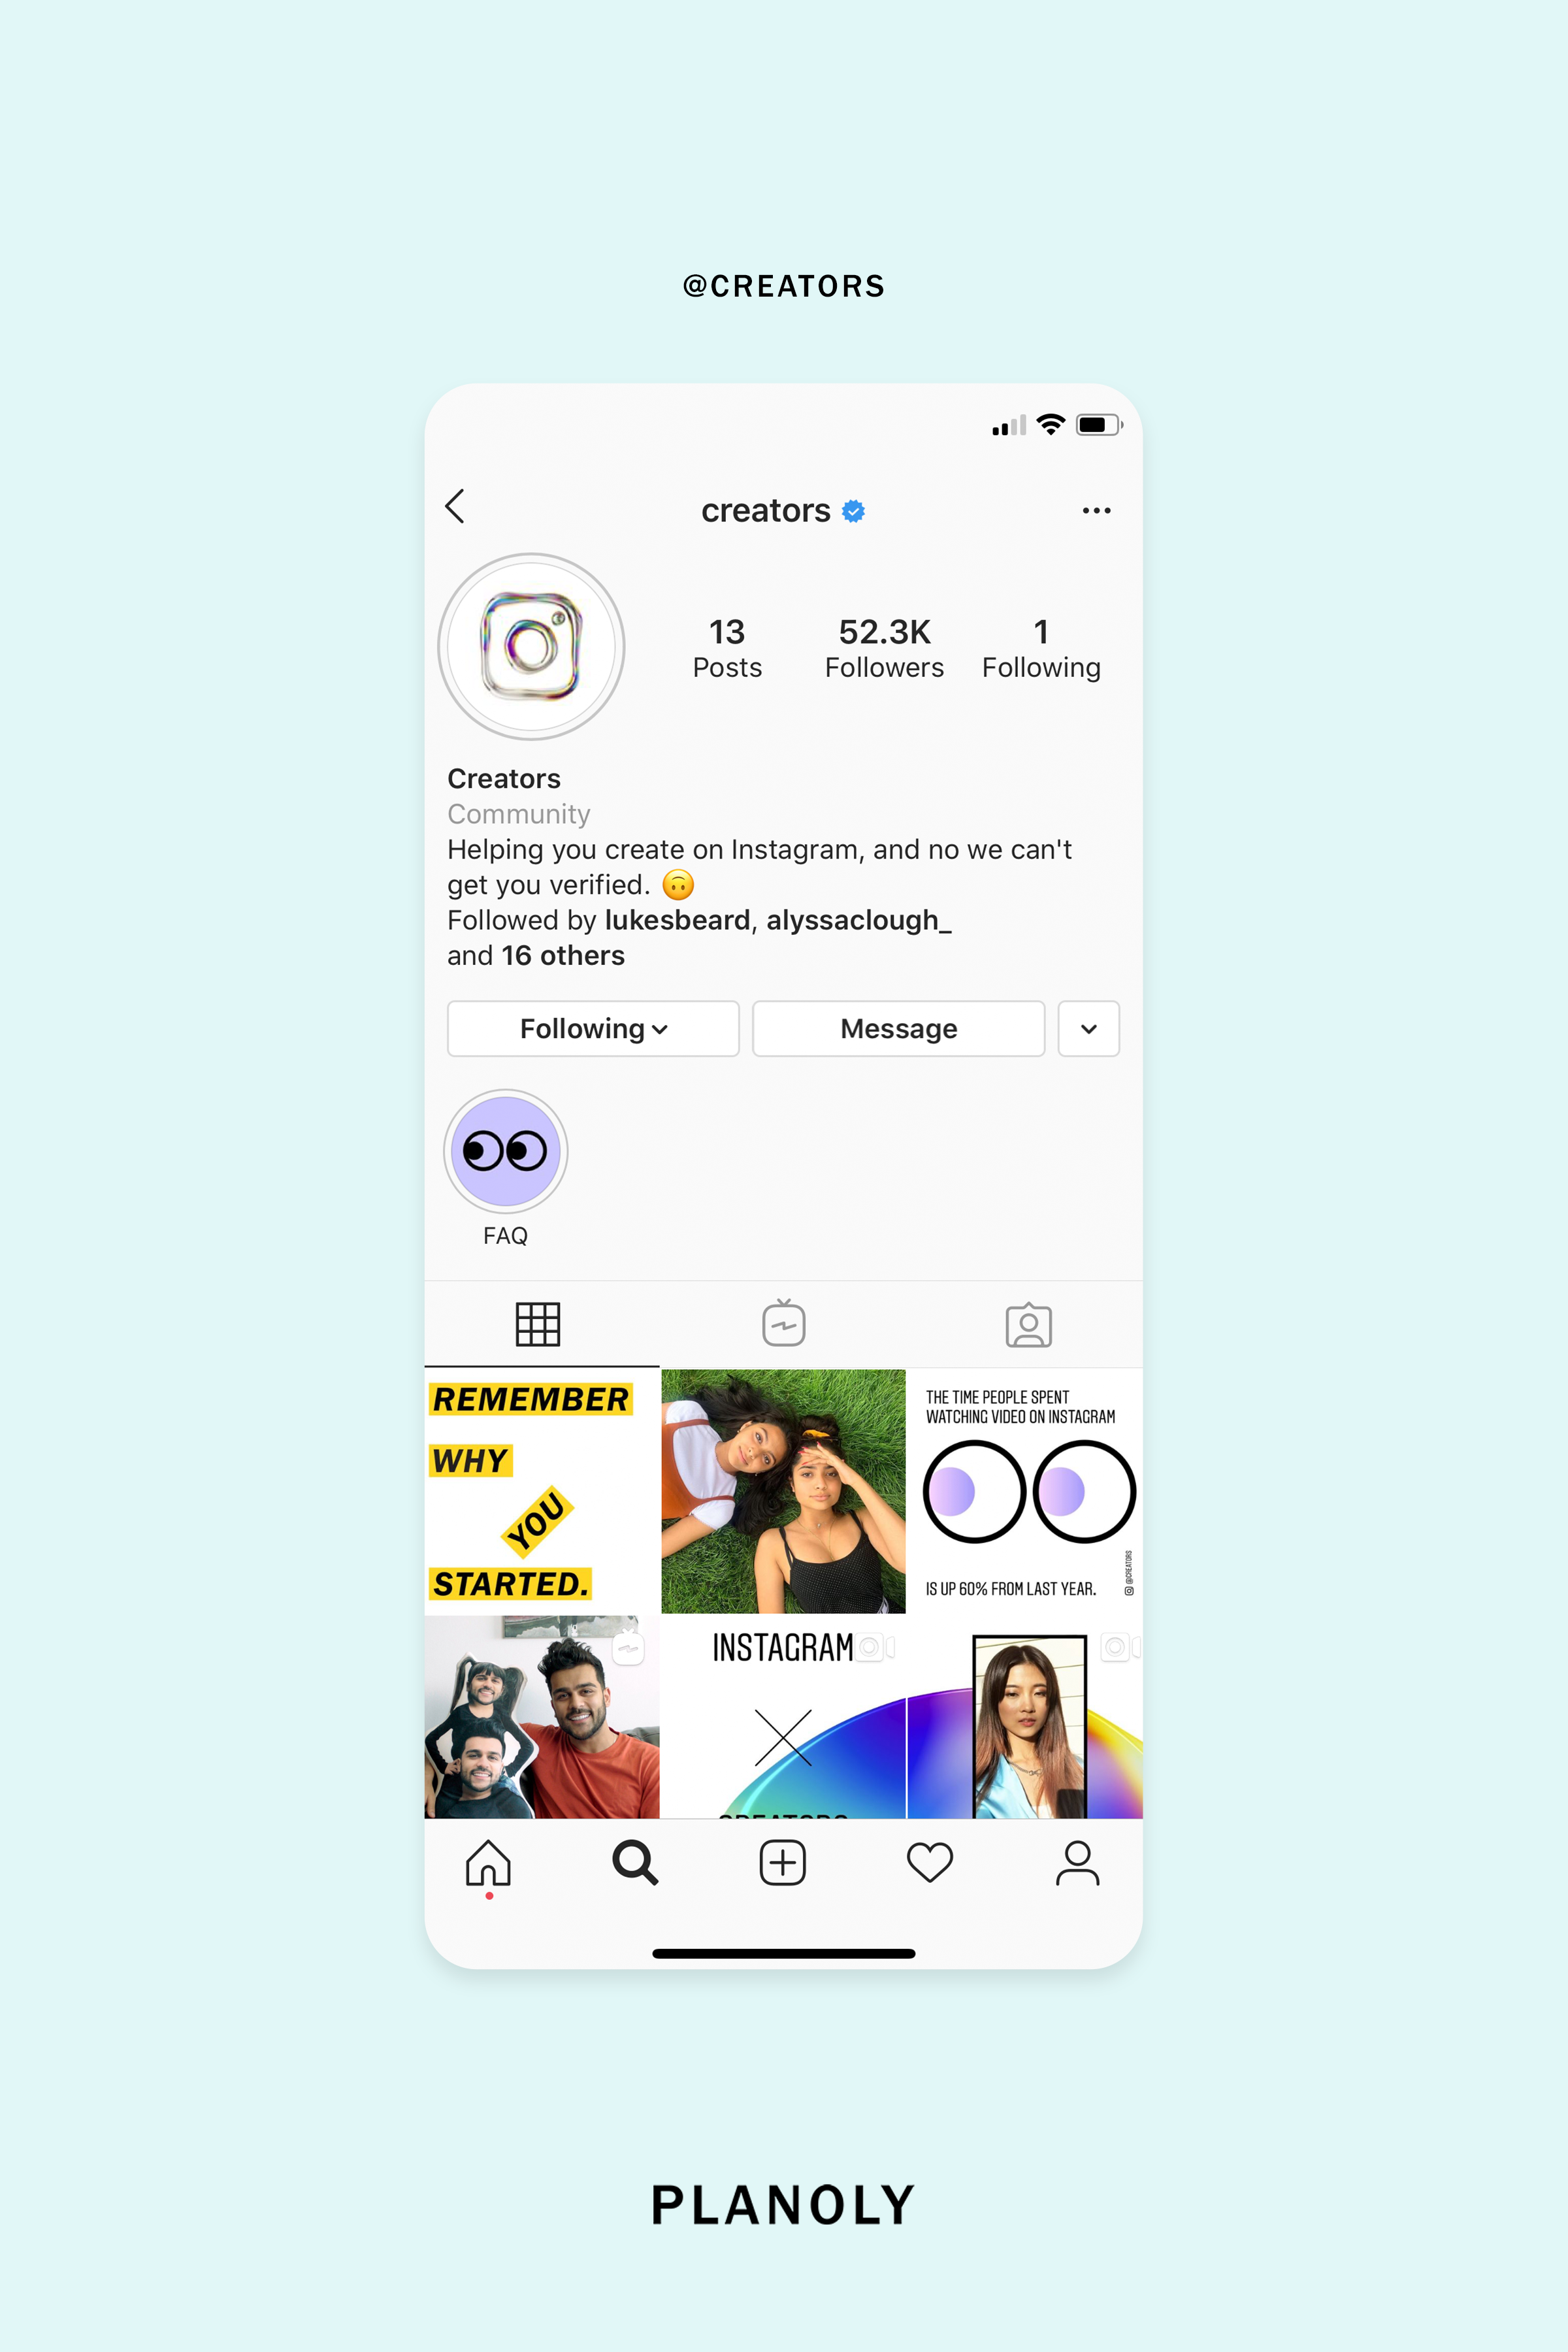 An Inside Look at Instagram's New @Creators Profile